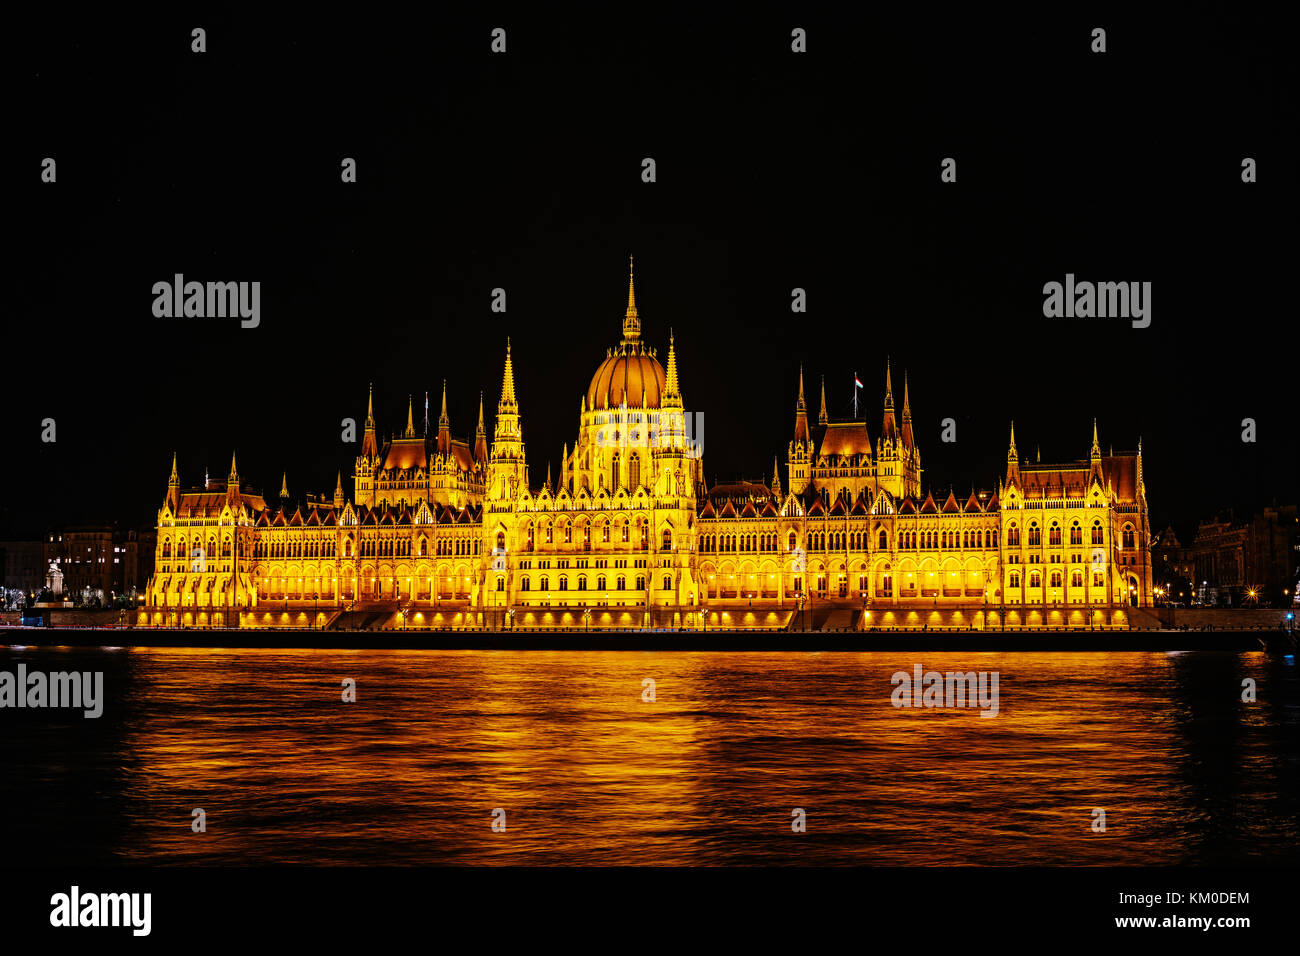 Hungarian Parliament Building, Budapest, Hungary. Seat of National Assembly of Hungary. Night view of House of Parliament. Famous landmark of Hungary, Stock Photo